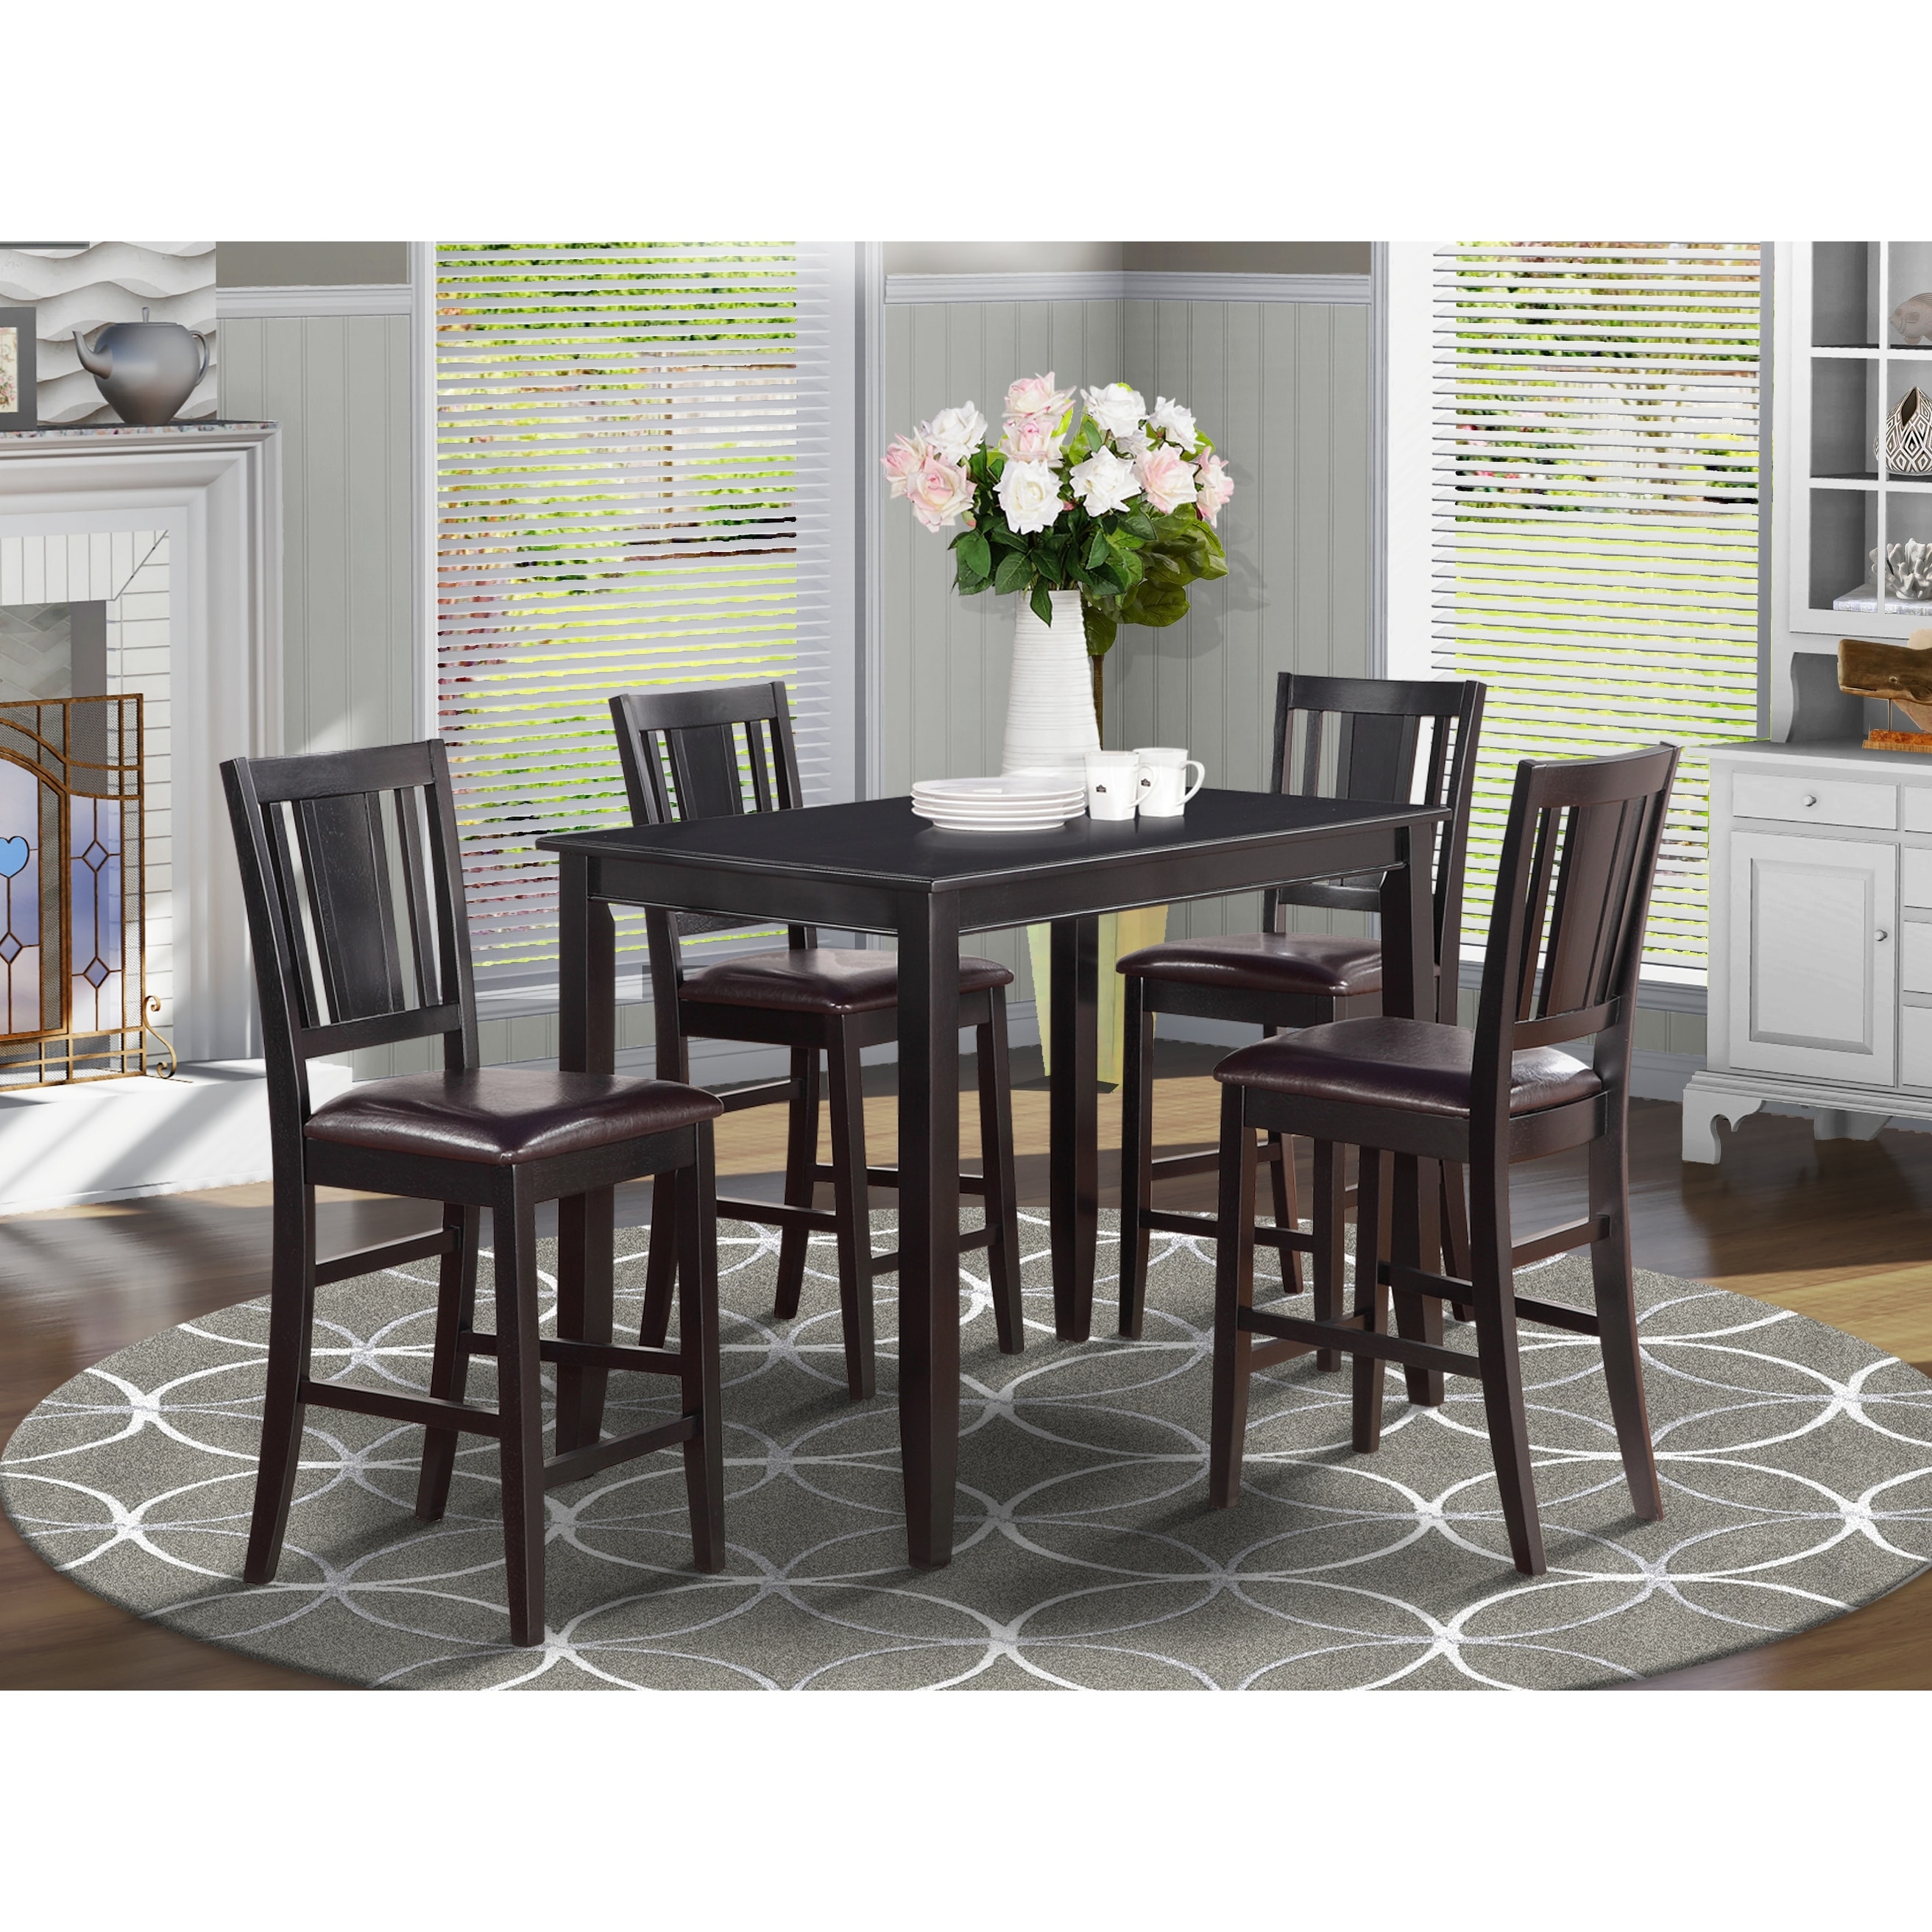 Black Counter Height Table And 4 Kitchen Counter Chairs 5 Piece Dining Set Overstock 10201081